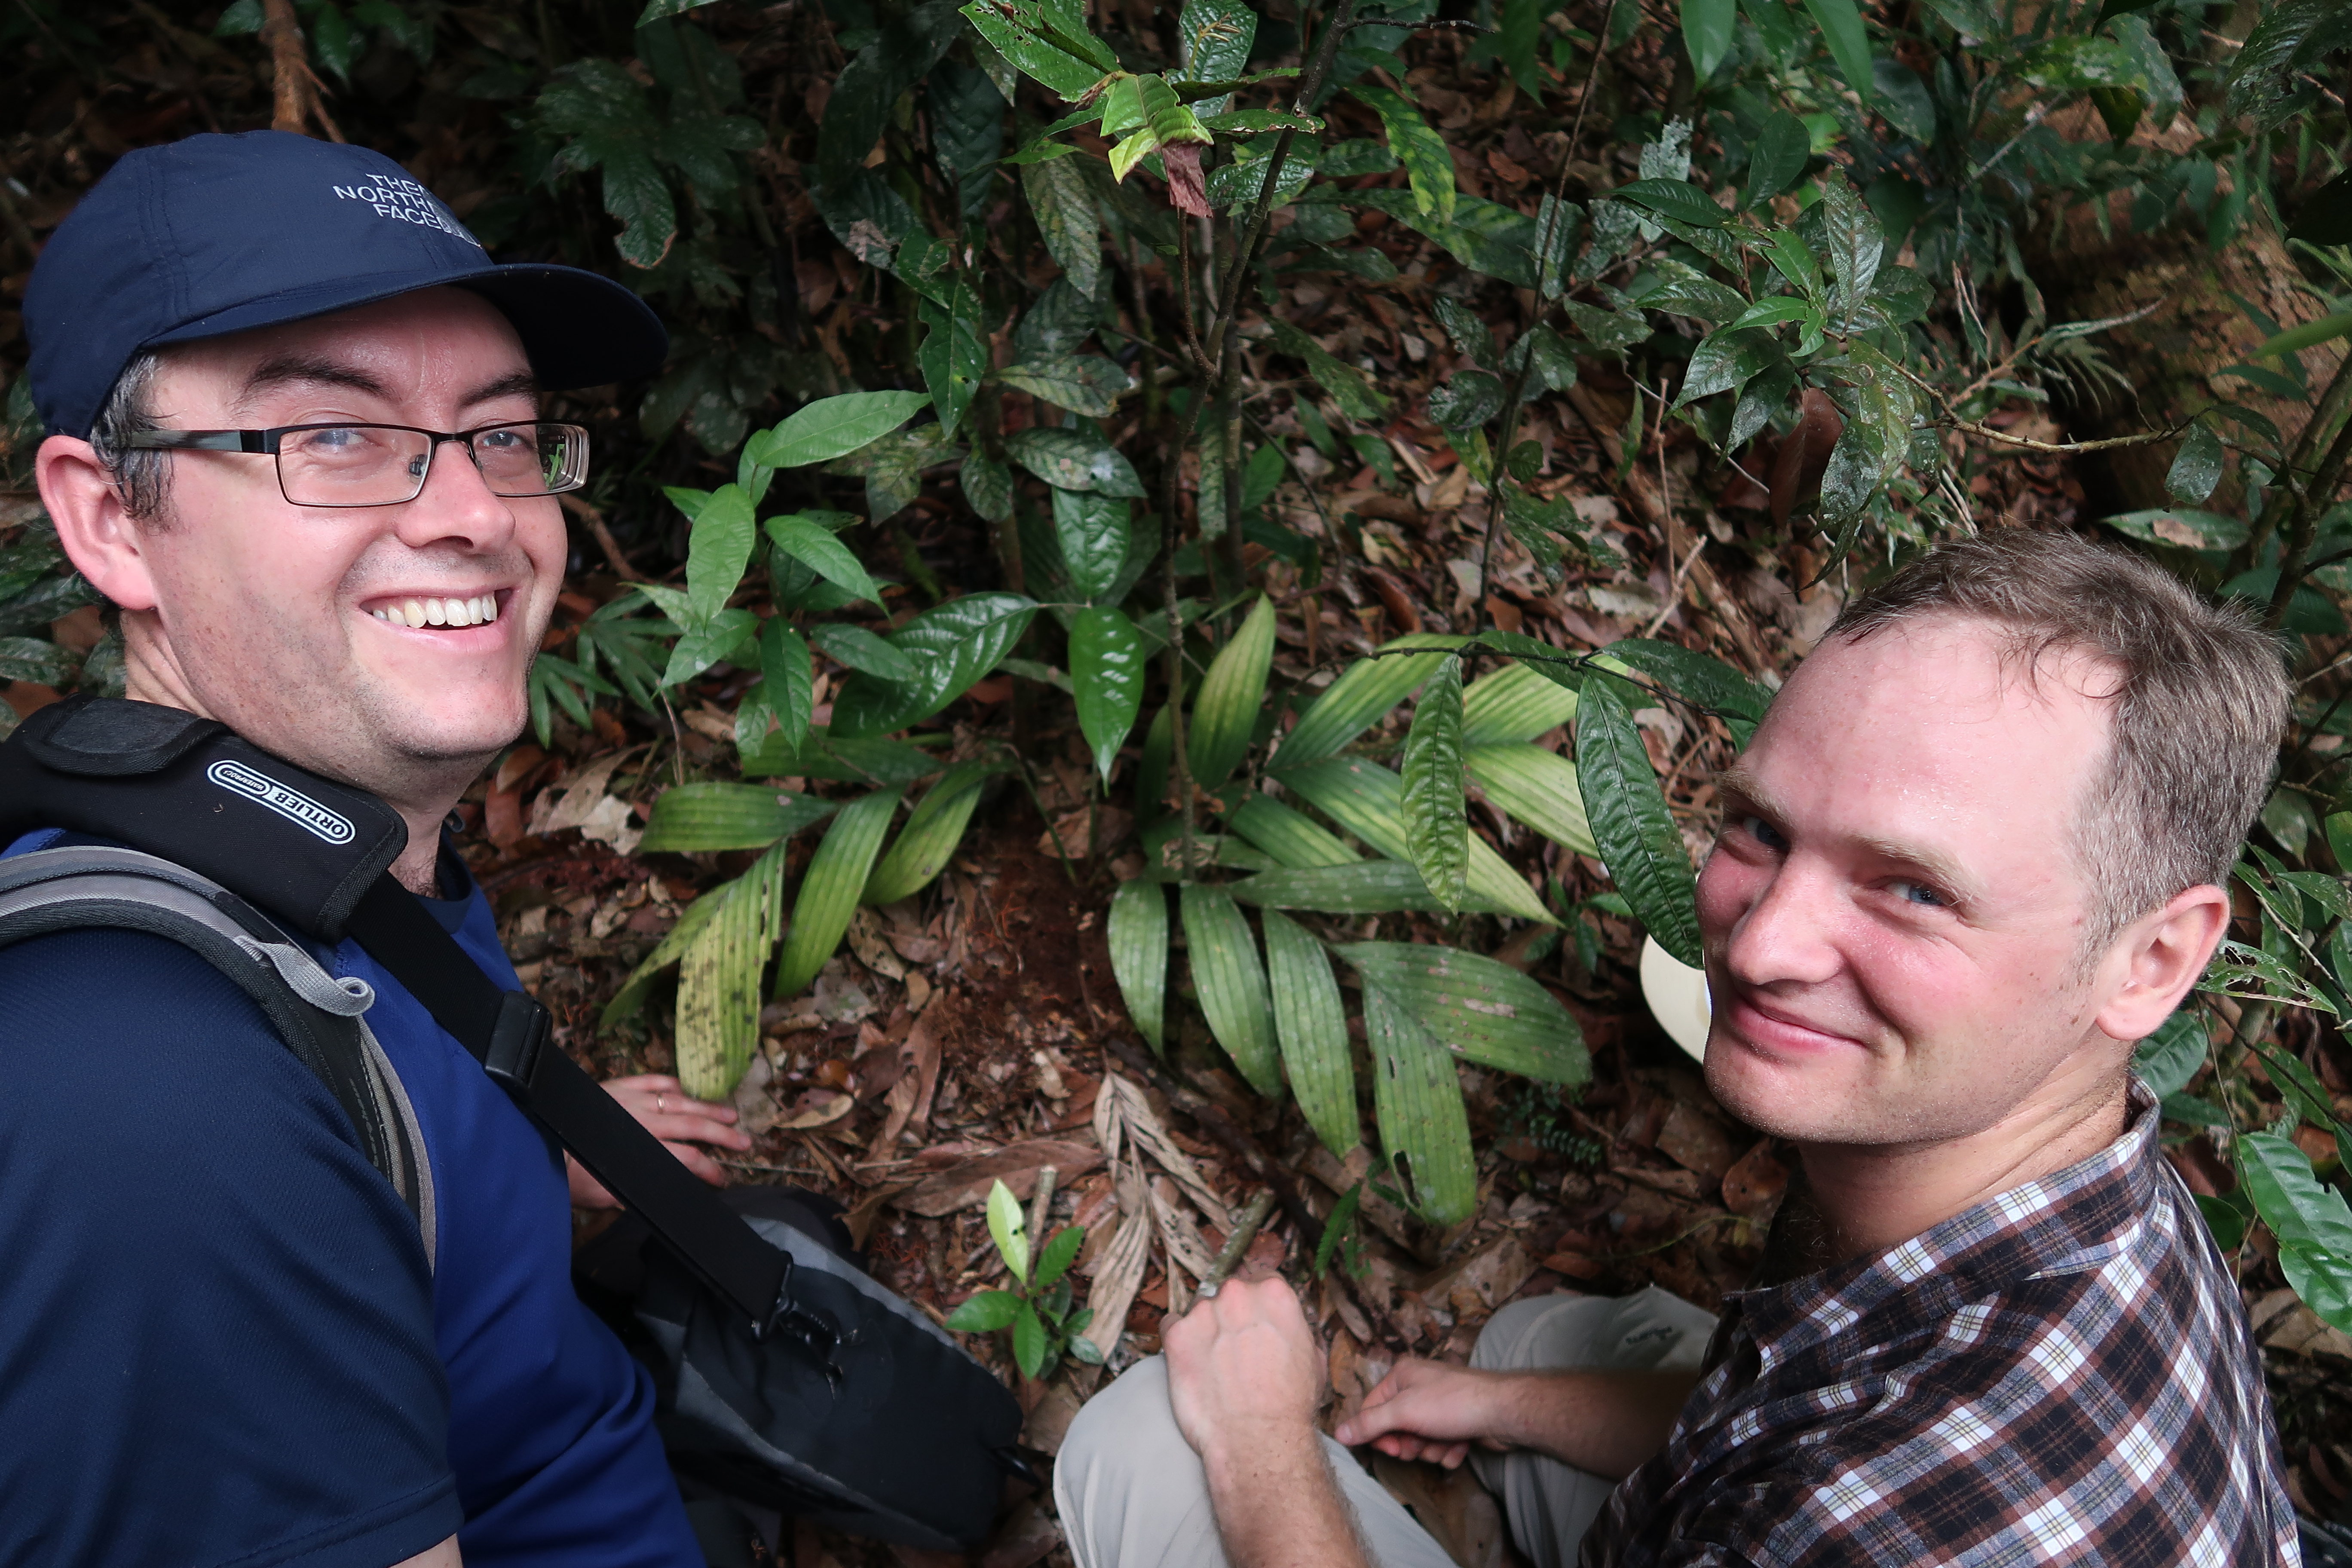 Two researchers sit next to a palm plant nestled into the soil. The exposed underground area shows fruit.